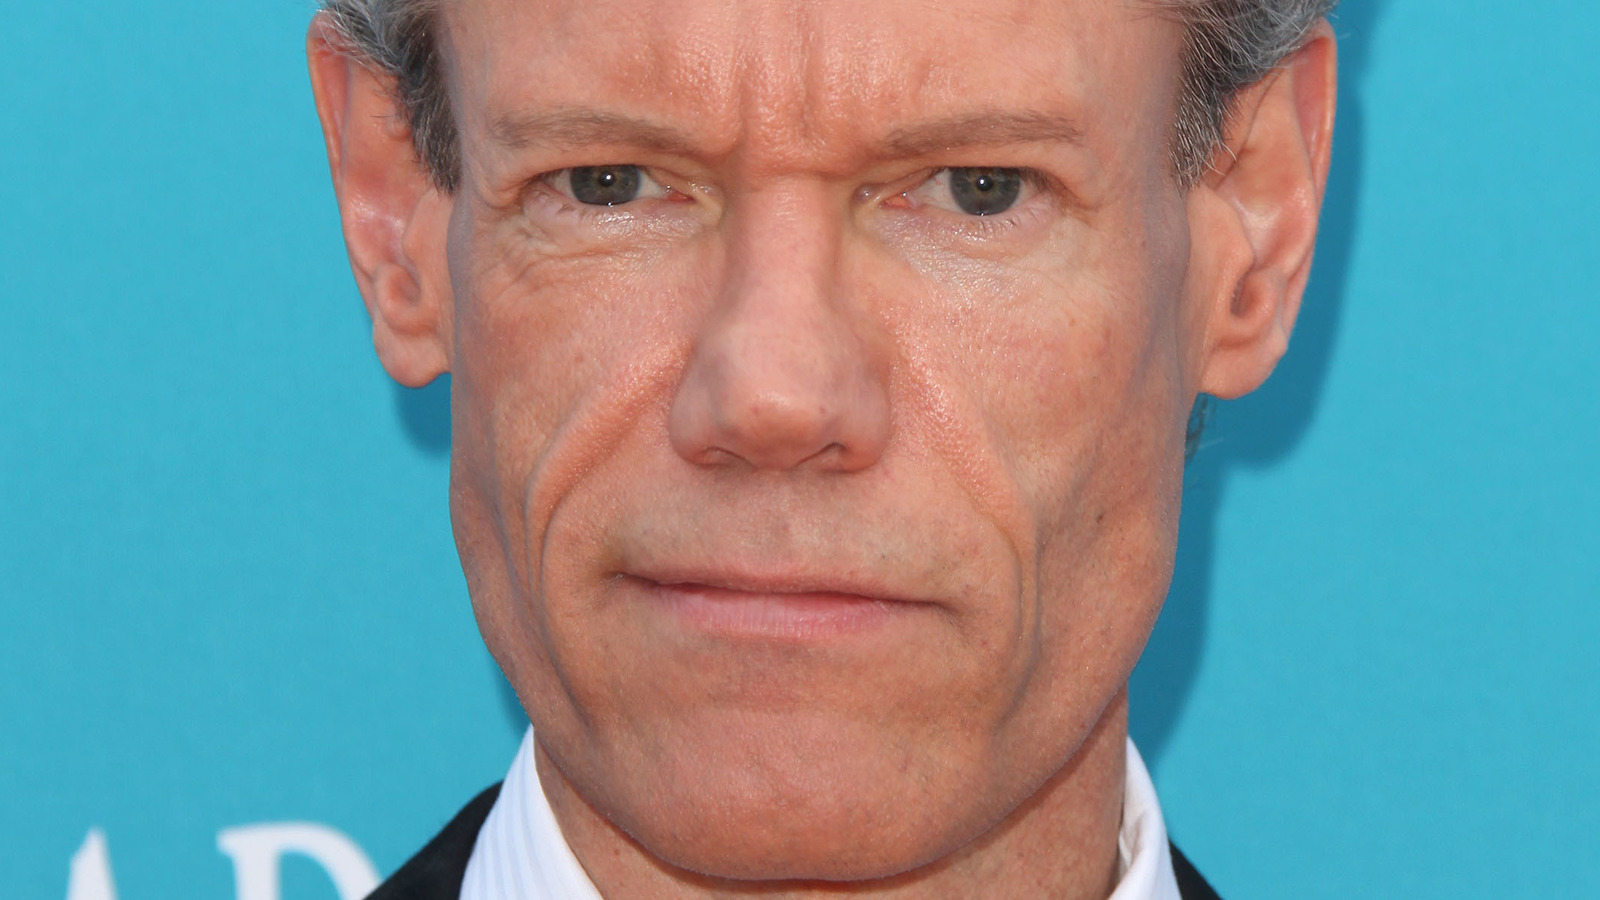 The Truth About Randy Travis' Health